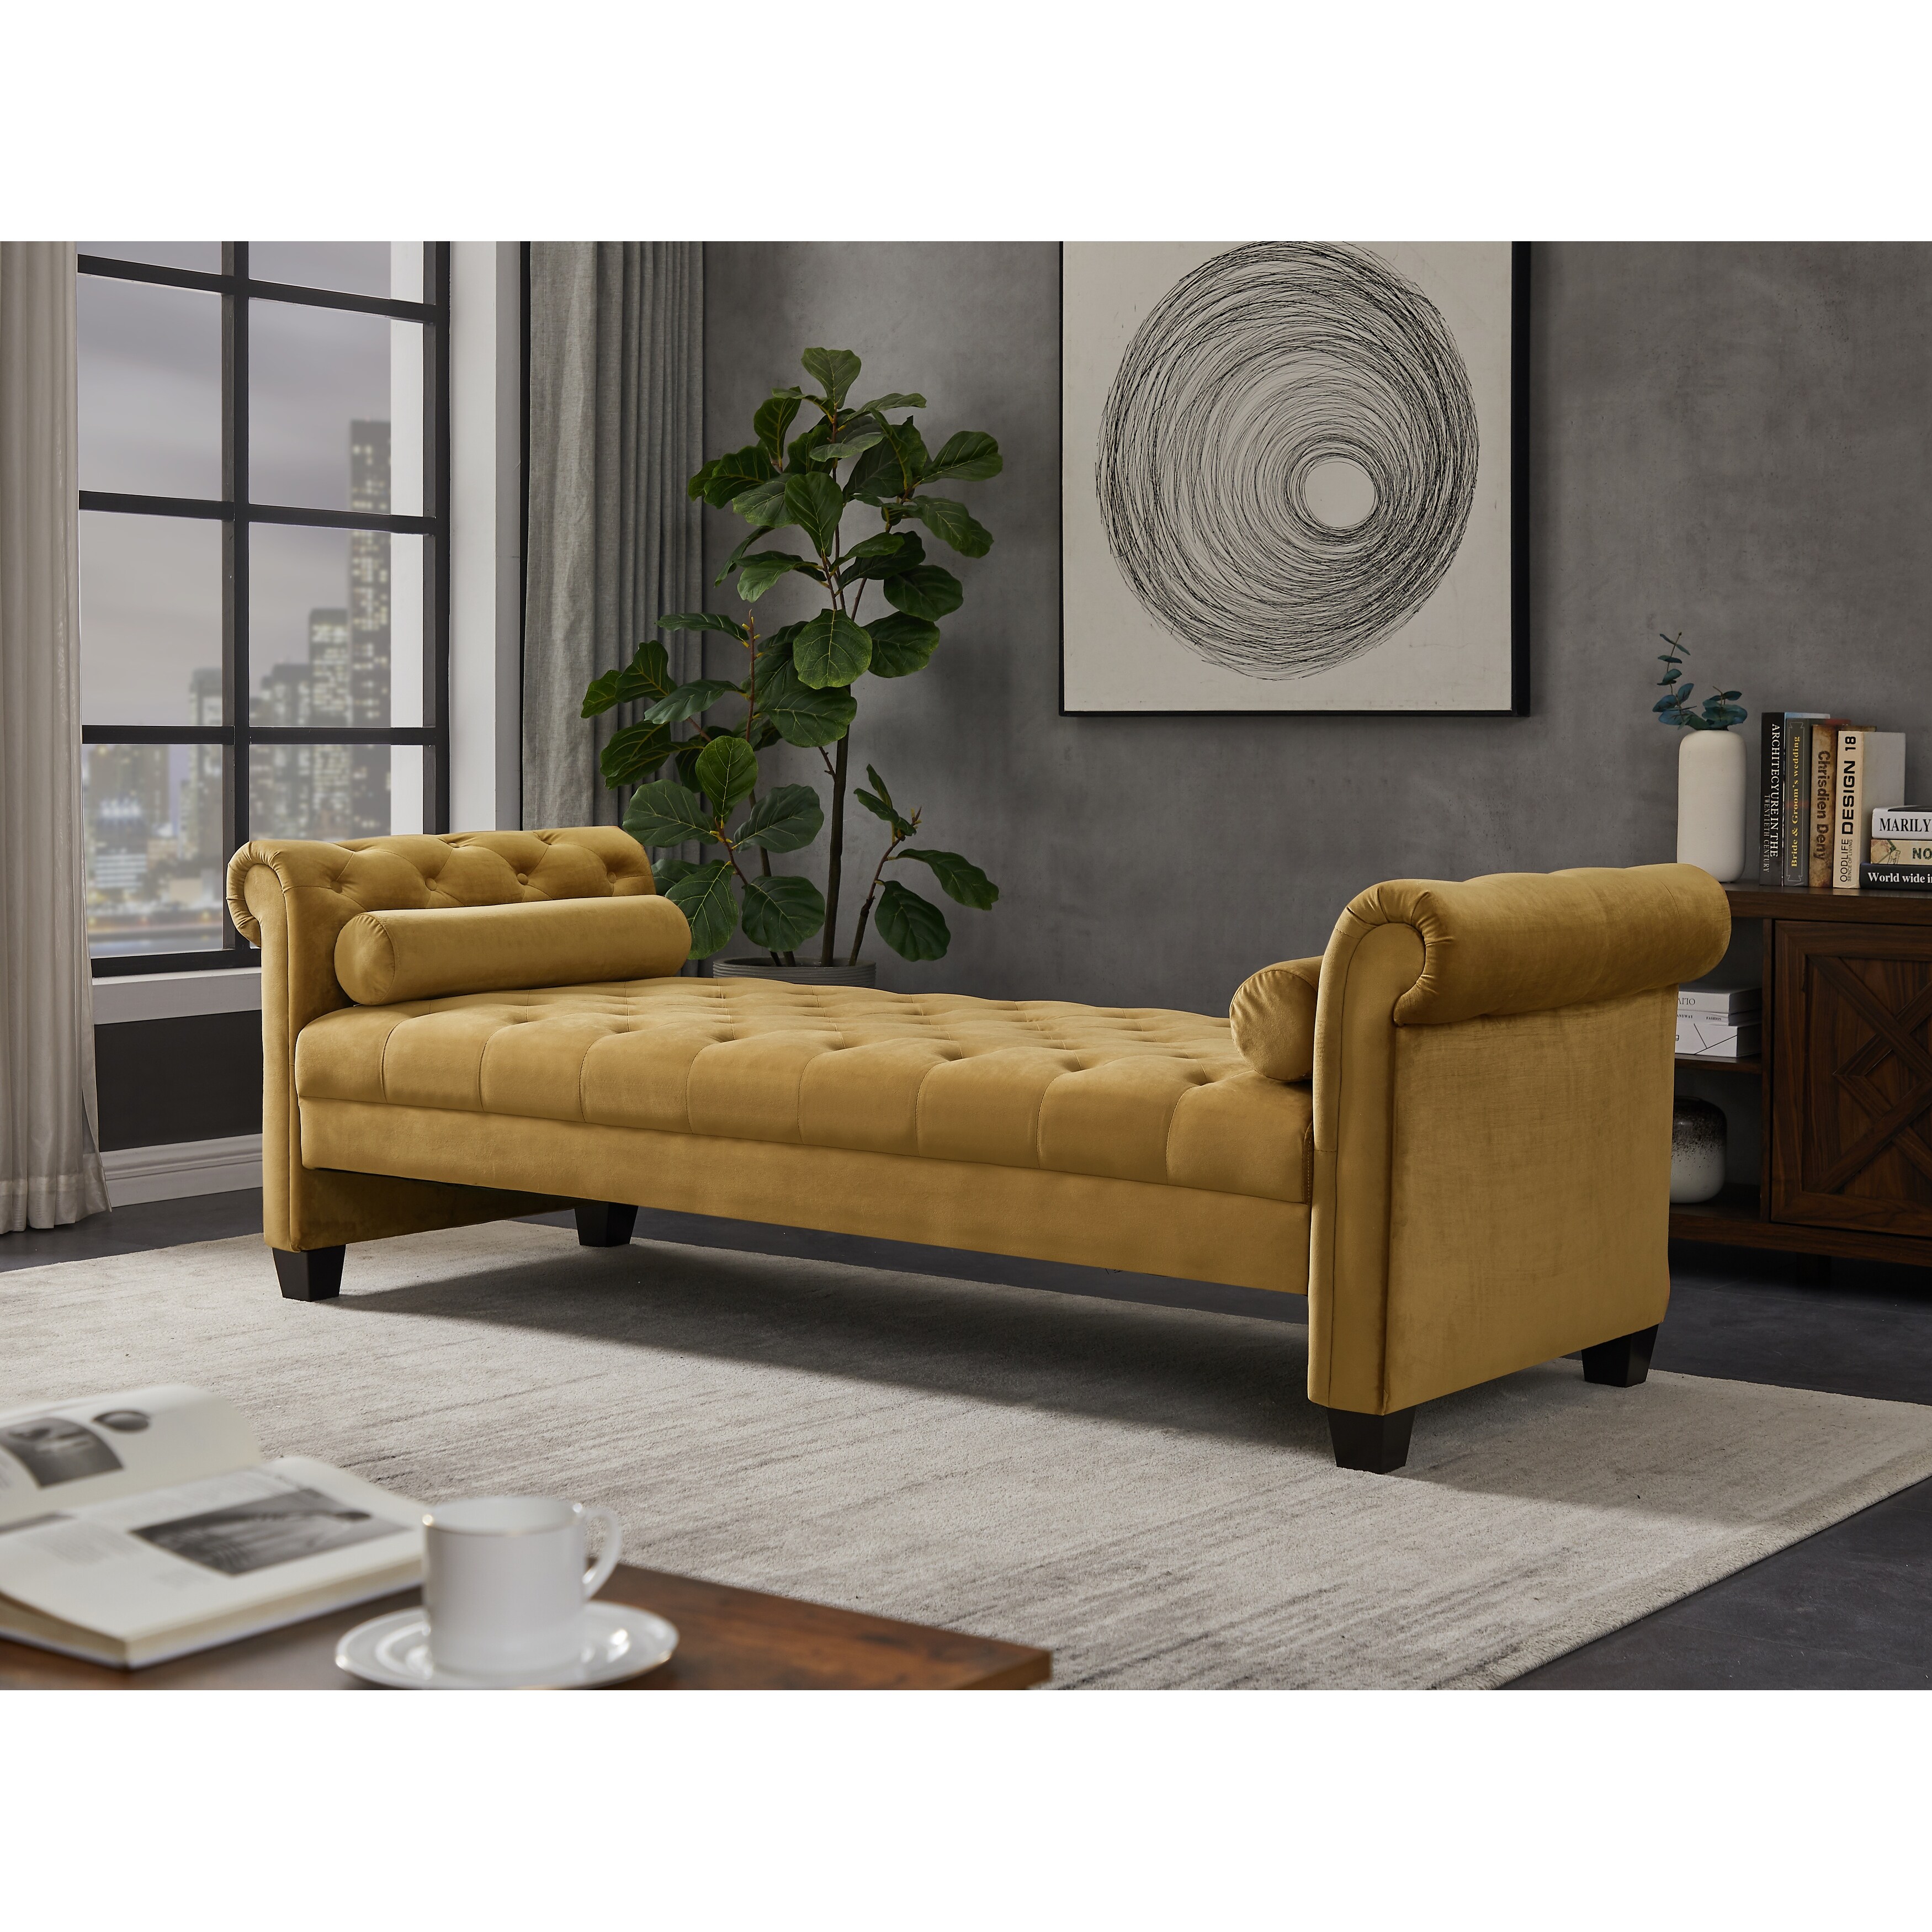 https://ak1.ostkcdn.com/images/products/is/images/direct/f923675960d587884031dcd737eddf30361d762b/Rectangular-Large-Sofa-Stool%2C-Tufted-Cushions-and-Armrest%2C-flannel-and-sofa-are-supported-by-solid-wood%2C-Wooden-frame.jpg